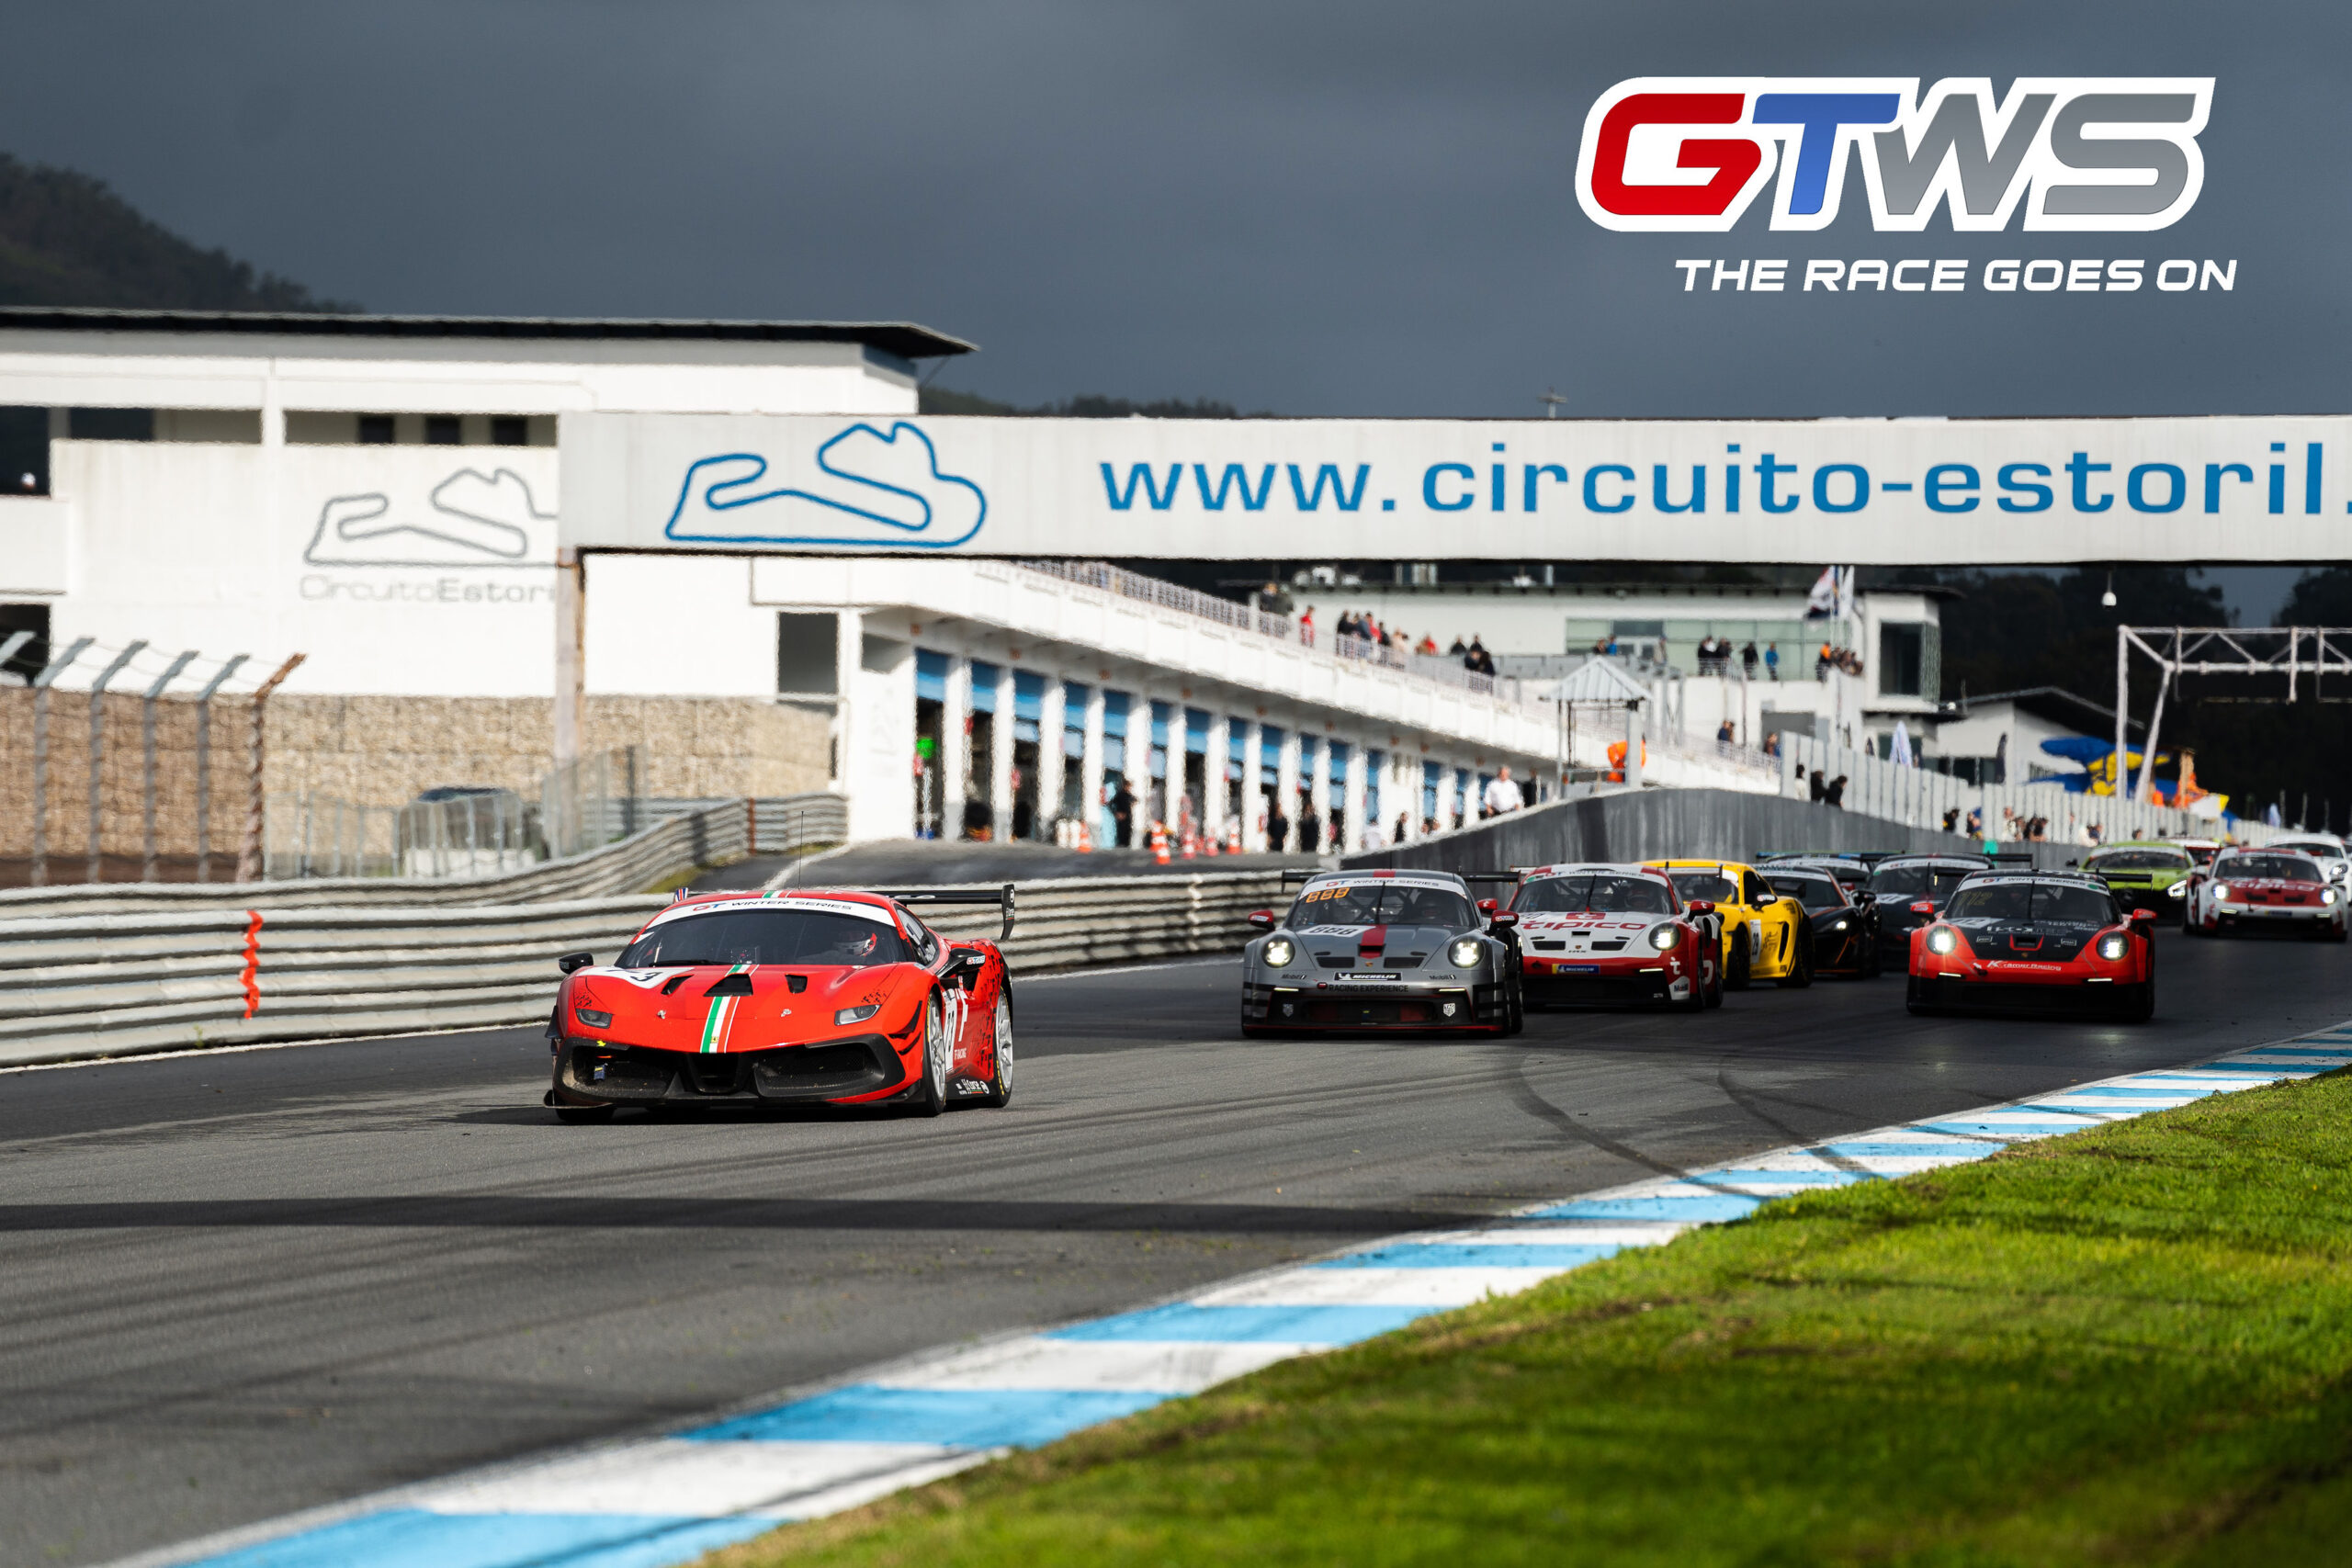 Tom Fleming racing Ferrari 488 Challenge Evo at Estoril, Portugal in the GT Winter Series with FF Corse